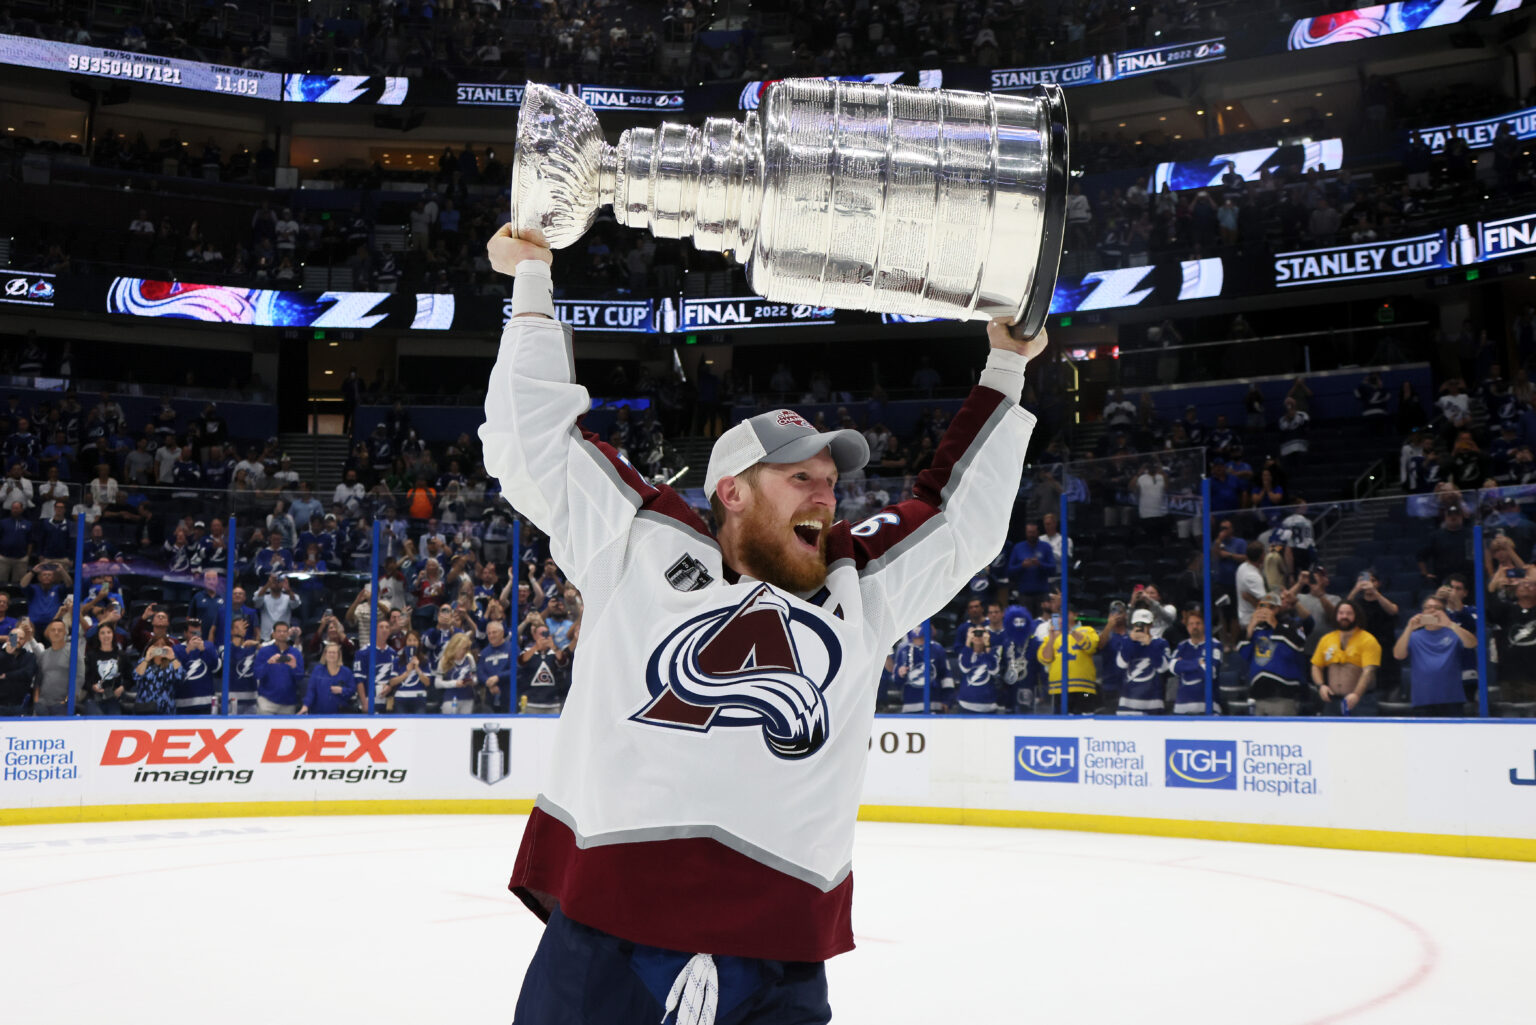 Avalanche Ticket Prices Surged After the Stanley Cup Win